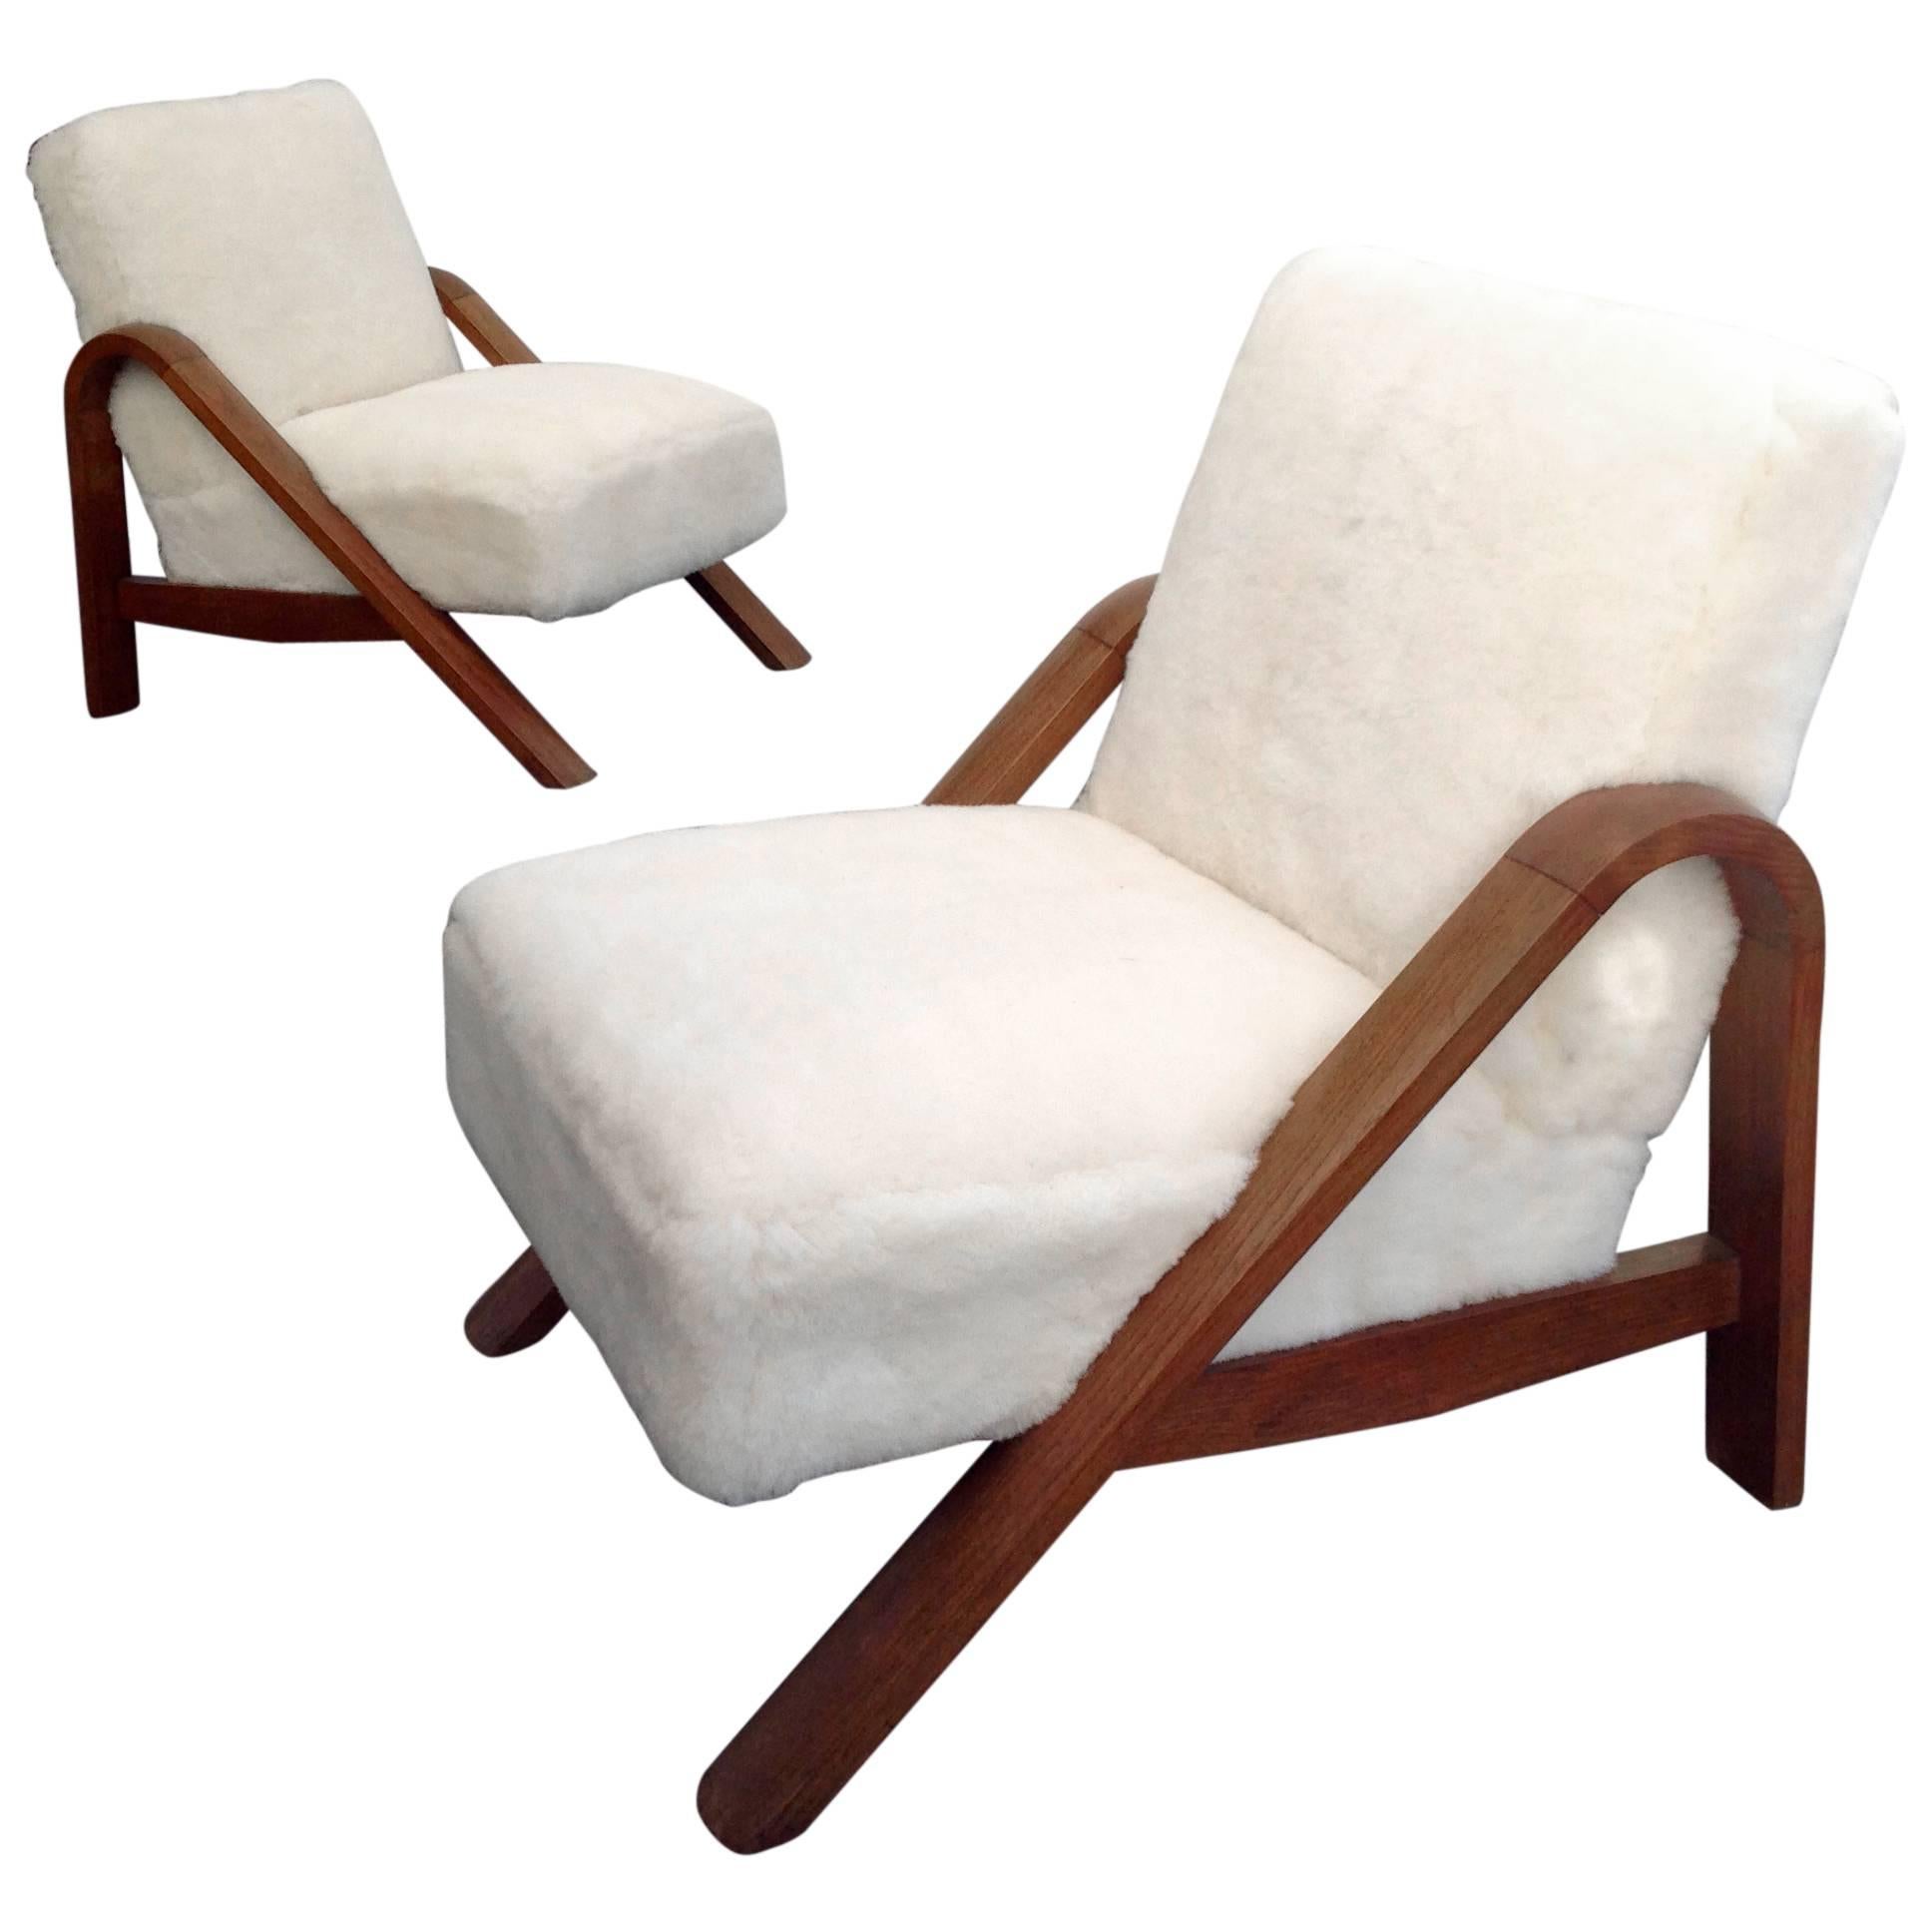 Two Impressive, Club Chairs Upholstered with Sheepskin, Anno, 1940